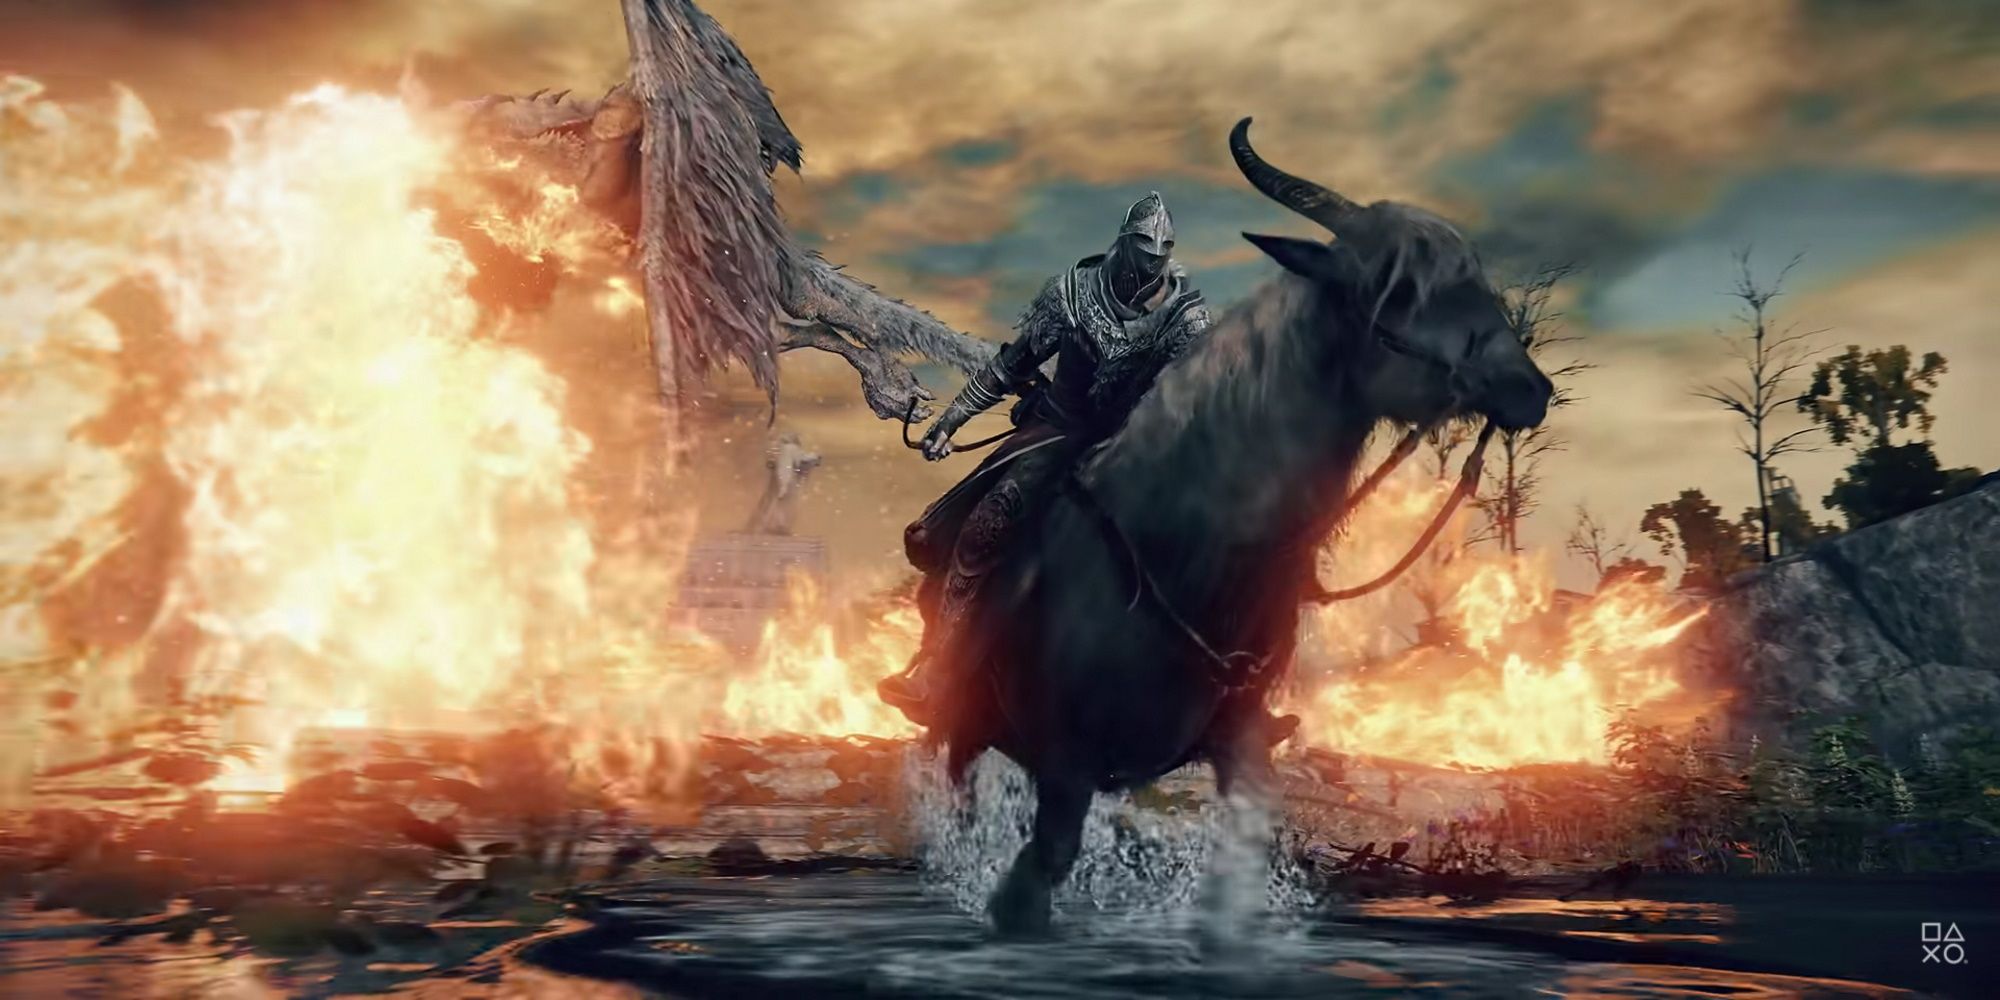 Elden Ring's Leaked Trailer Has Been Upscaled To HD - PlayStation Universe